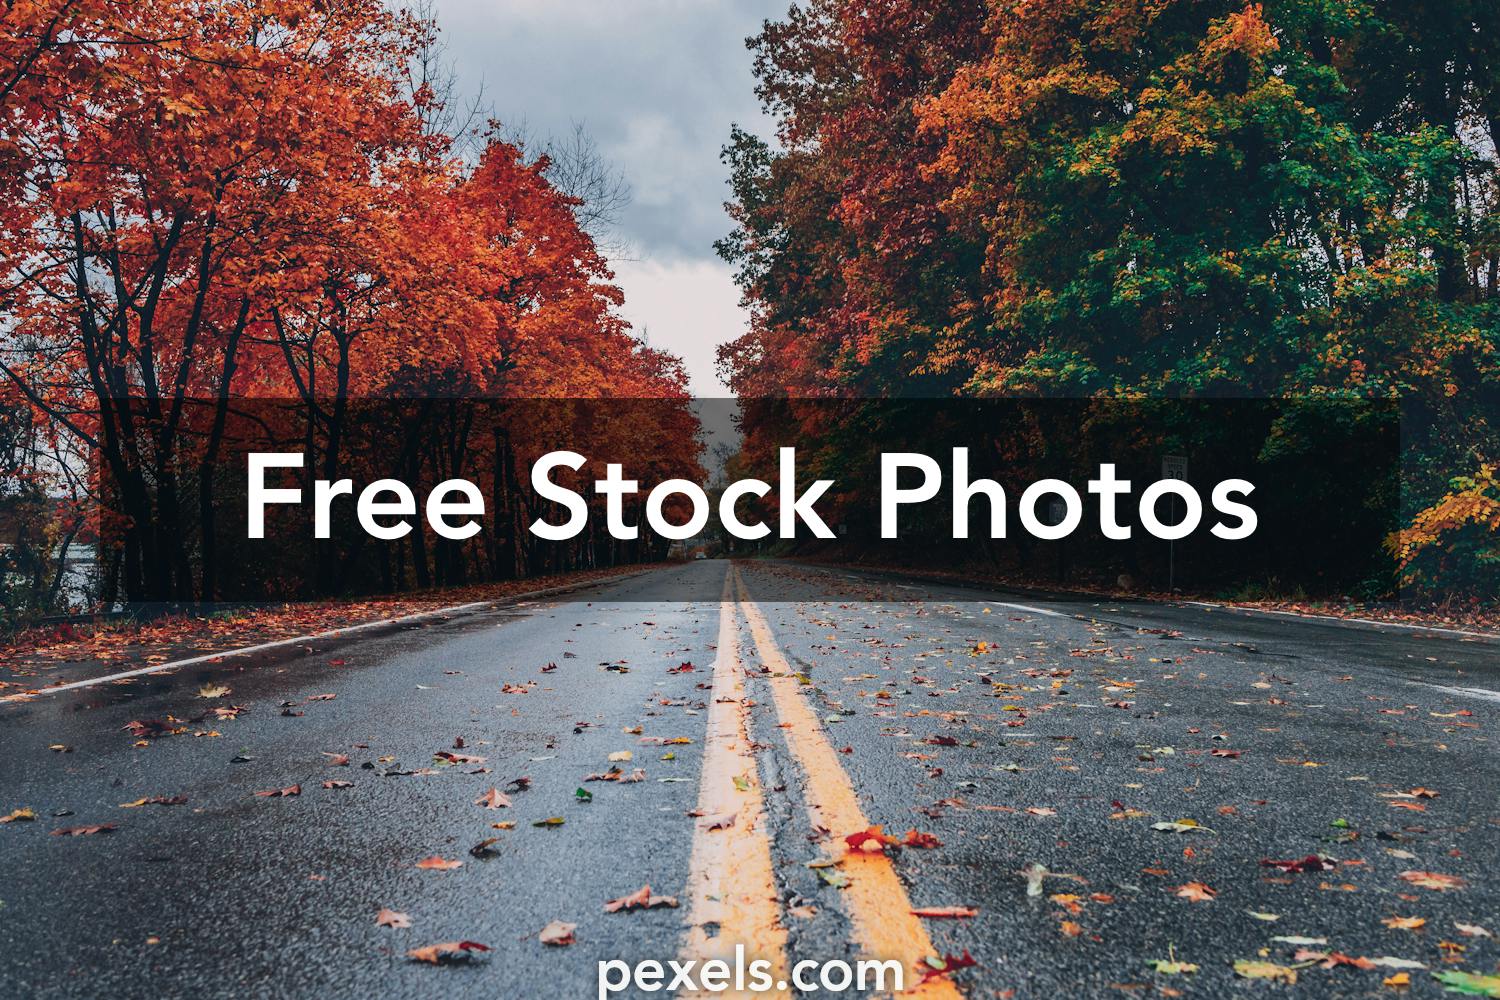 Free Backgrounds Images – Browse 336,474 Free Stock Photos